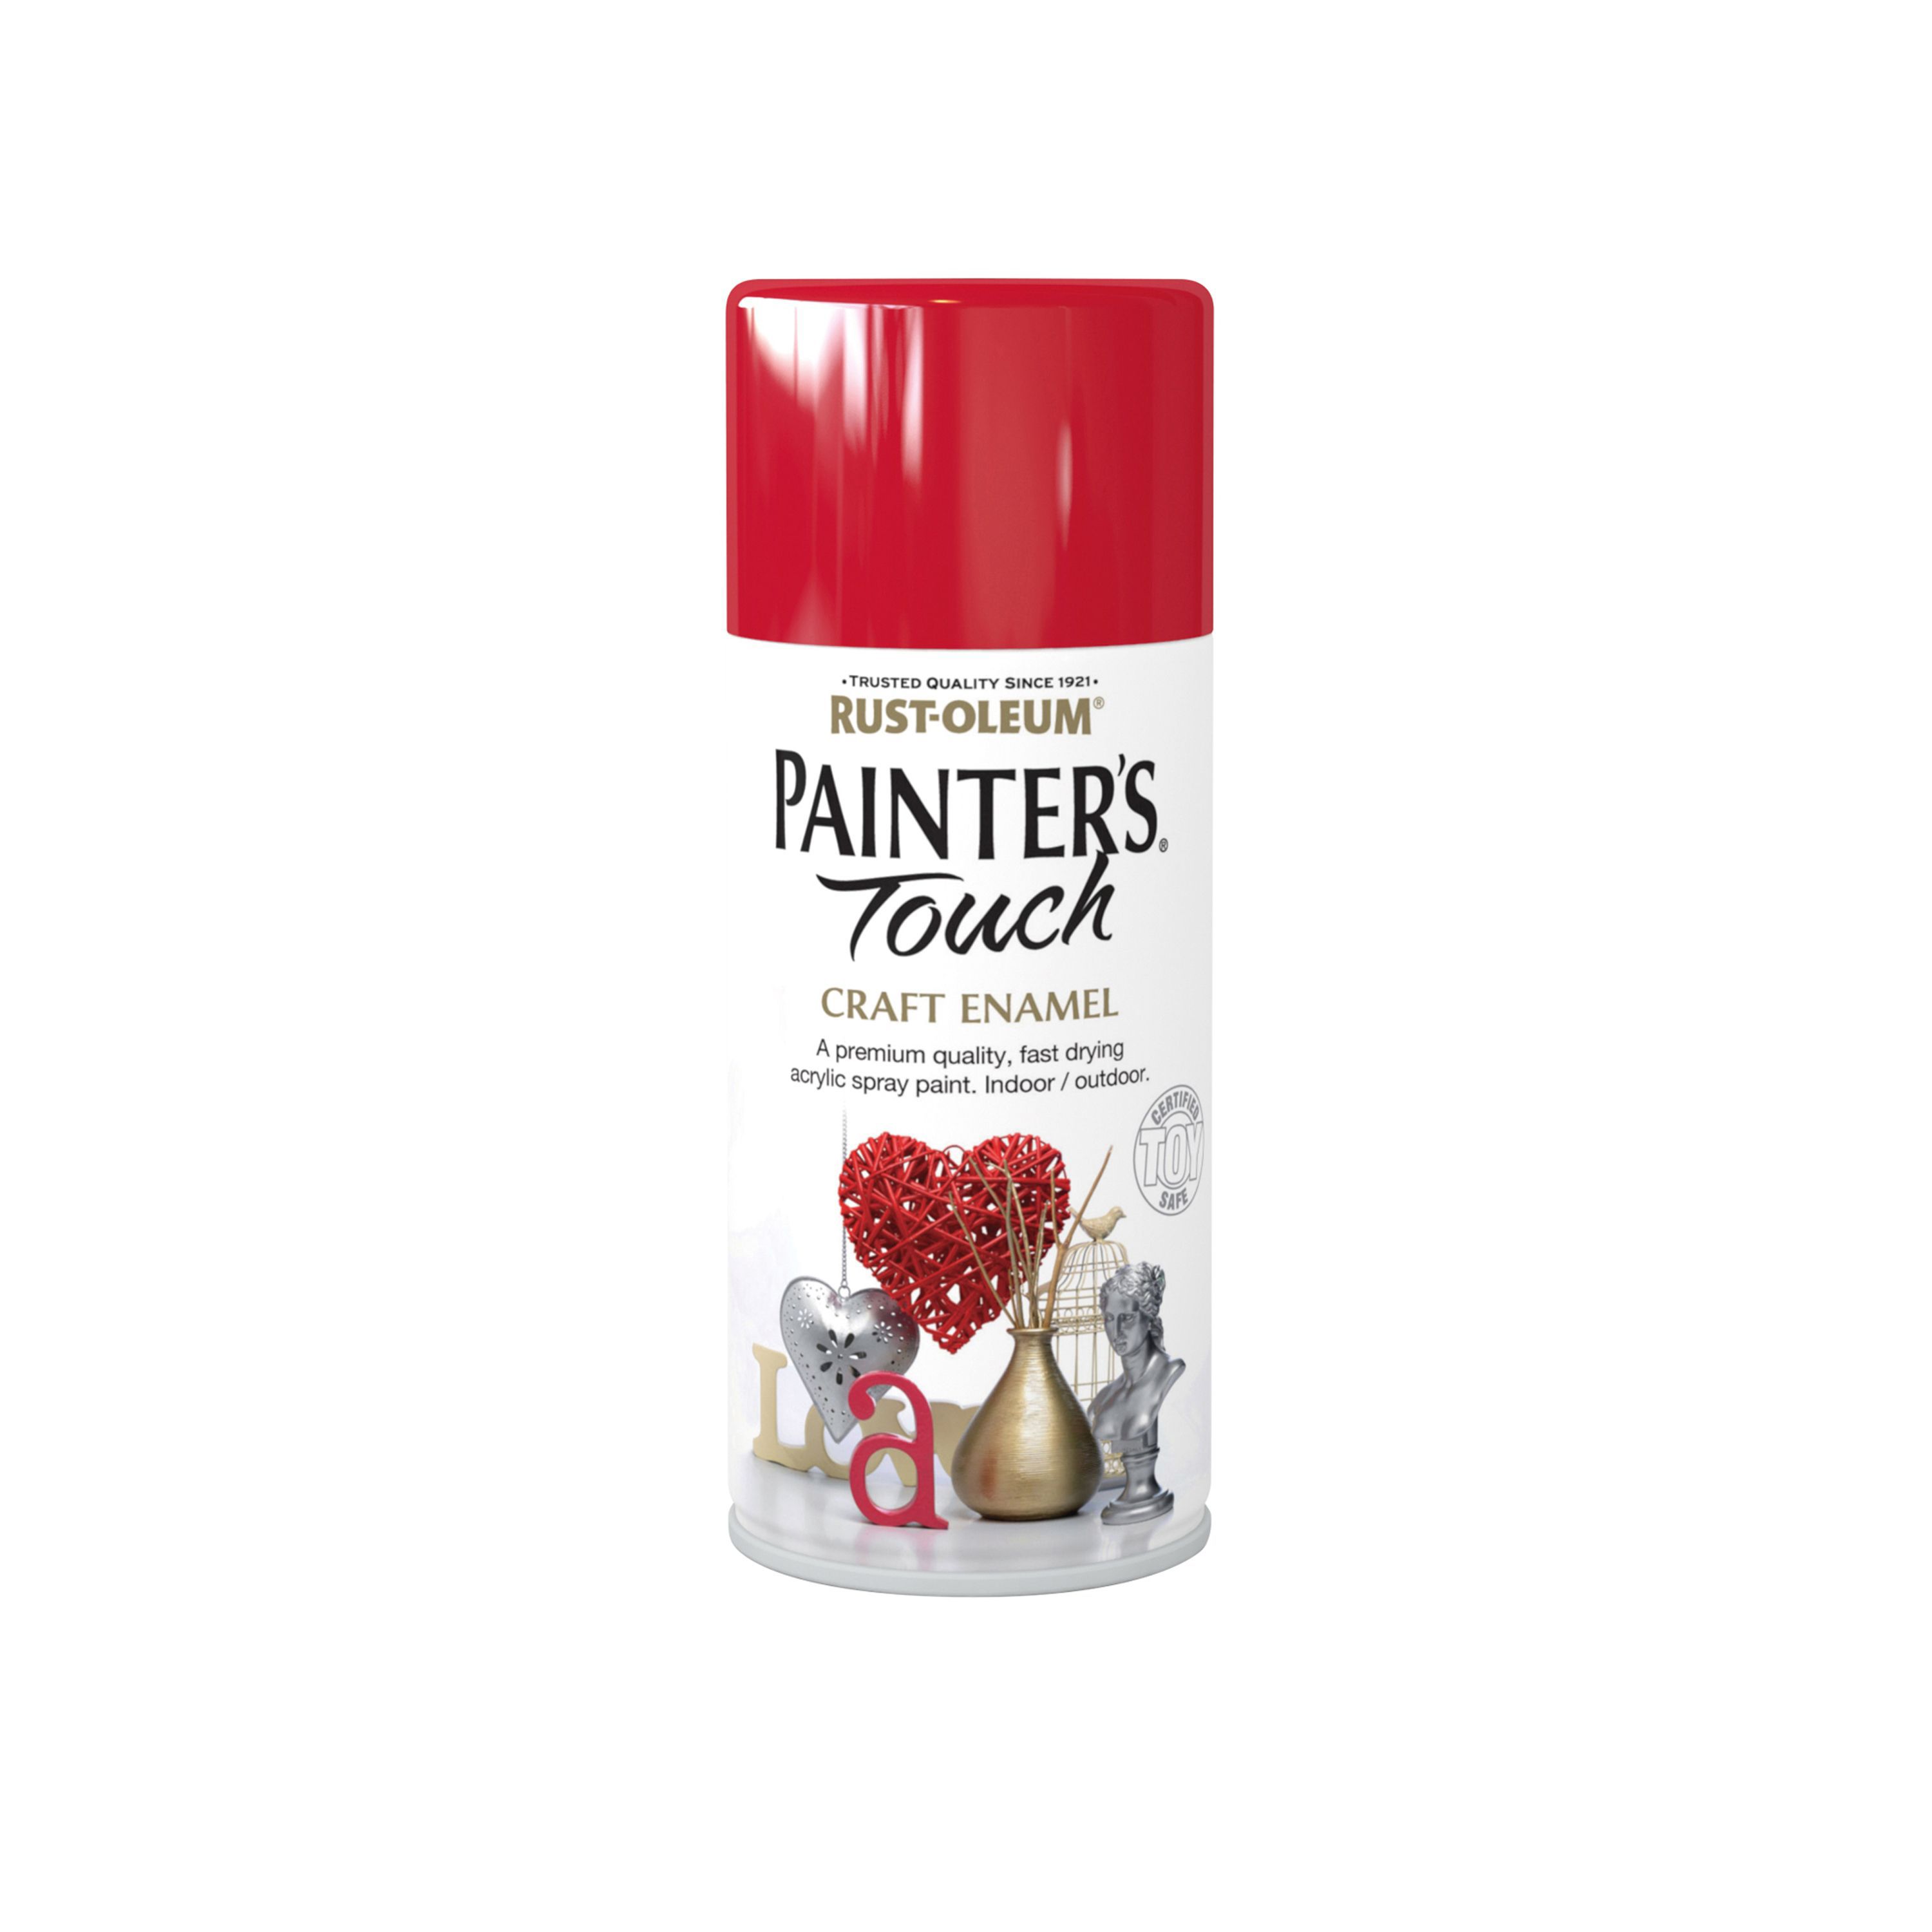 Rust-Oleum Painter's touch Cherry red Gloss Multi-surface Decorative spray paint, 150ml